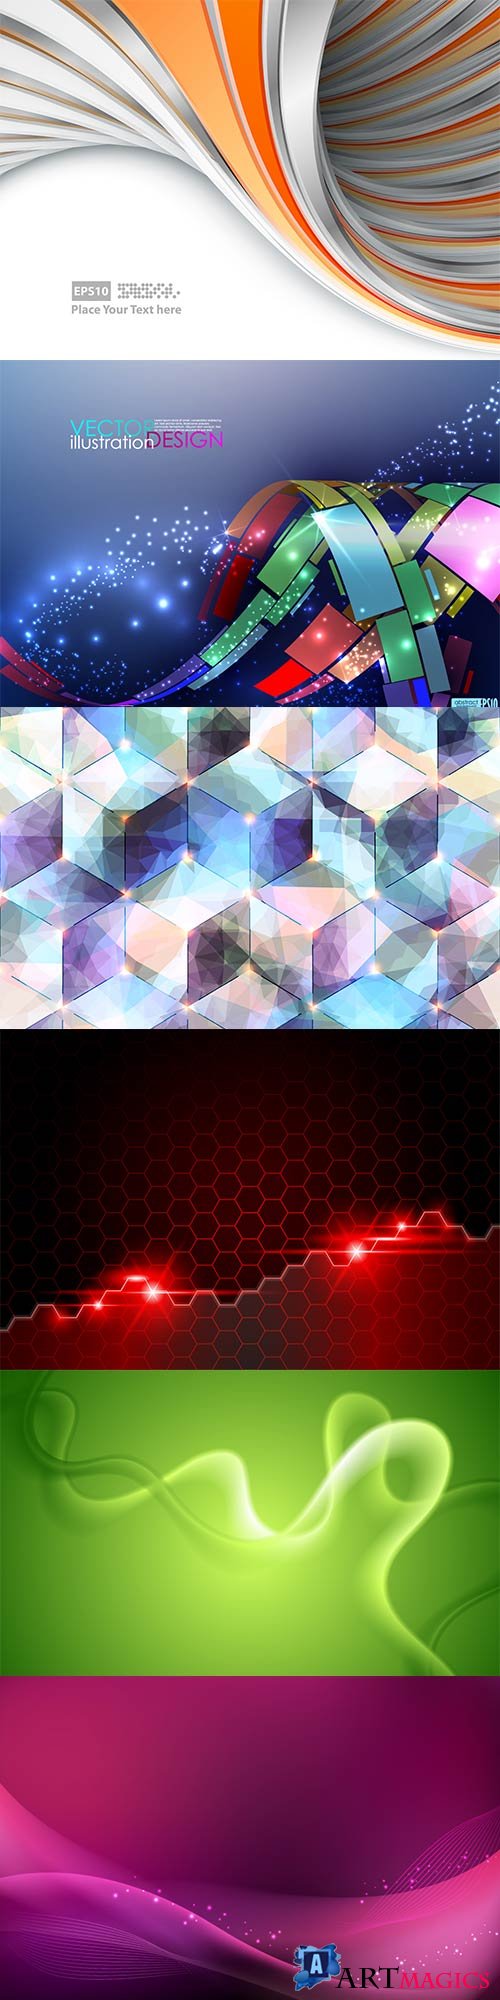 Bright colorful abstract backgrounds vector - 90